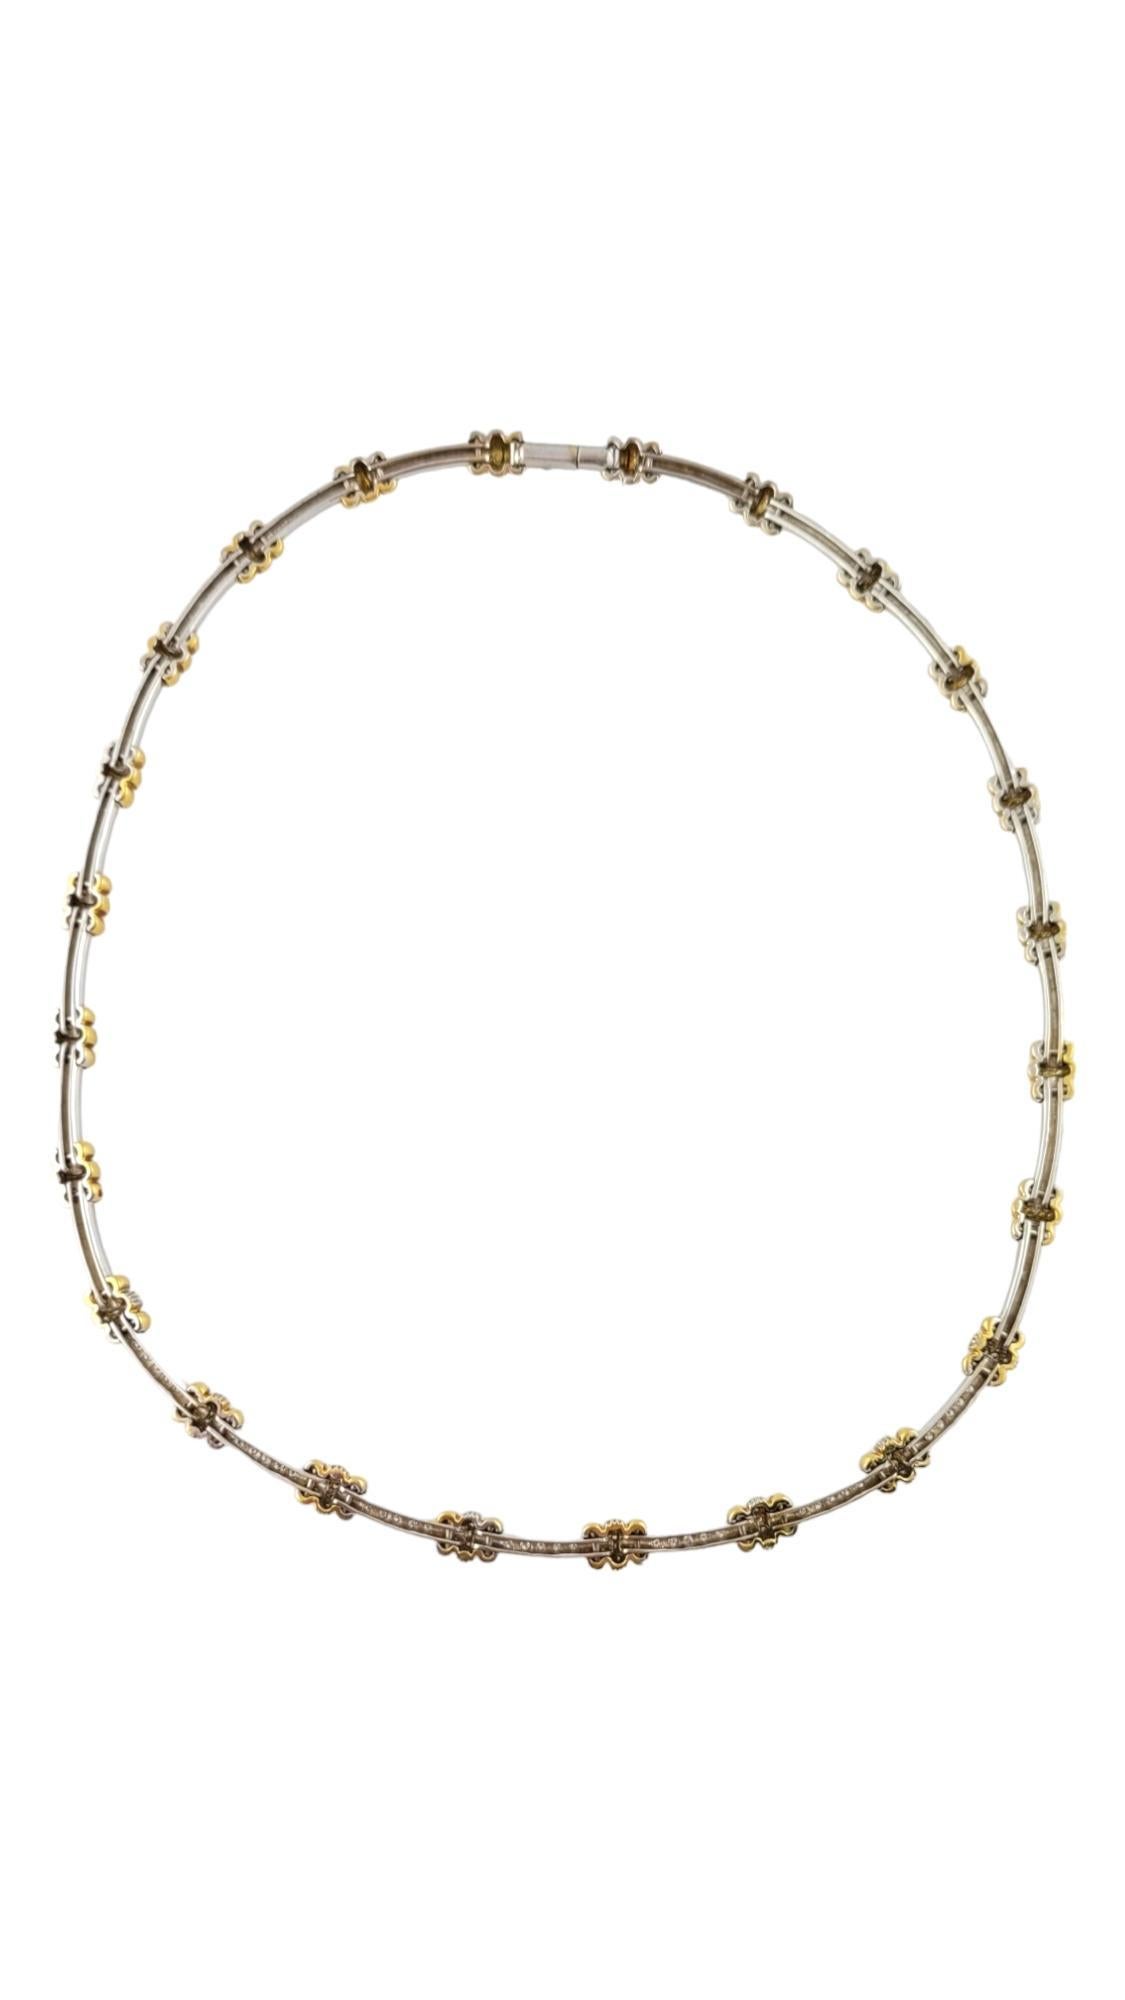 Roberto Coin 18K White and Yellow Gold Diamond Choker Collar Necklace #16961 In Good Condition For Sale In Washington Depot, CT